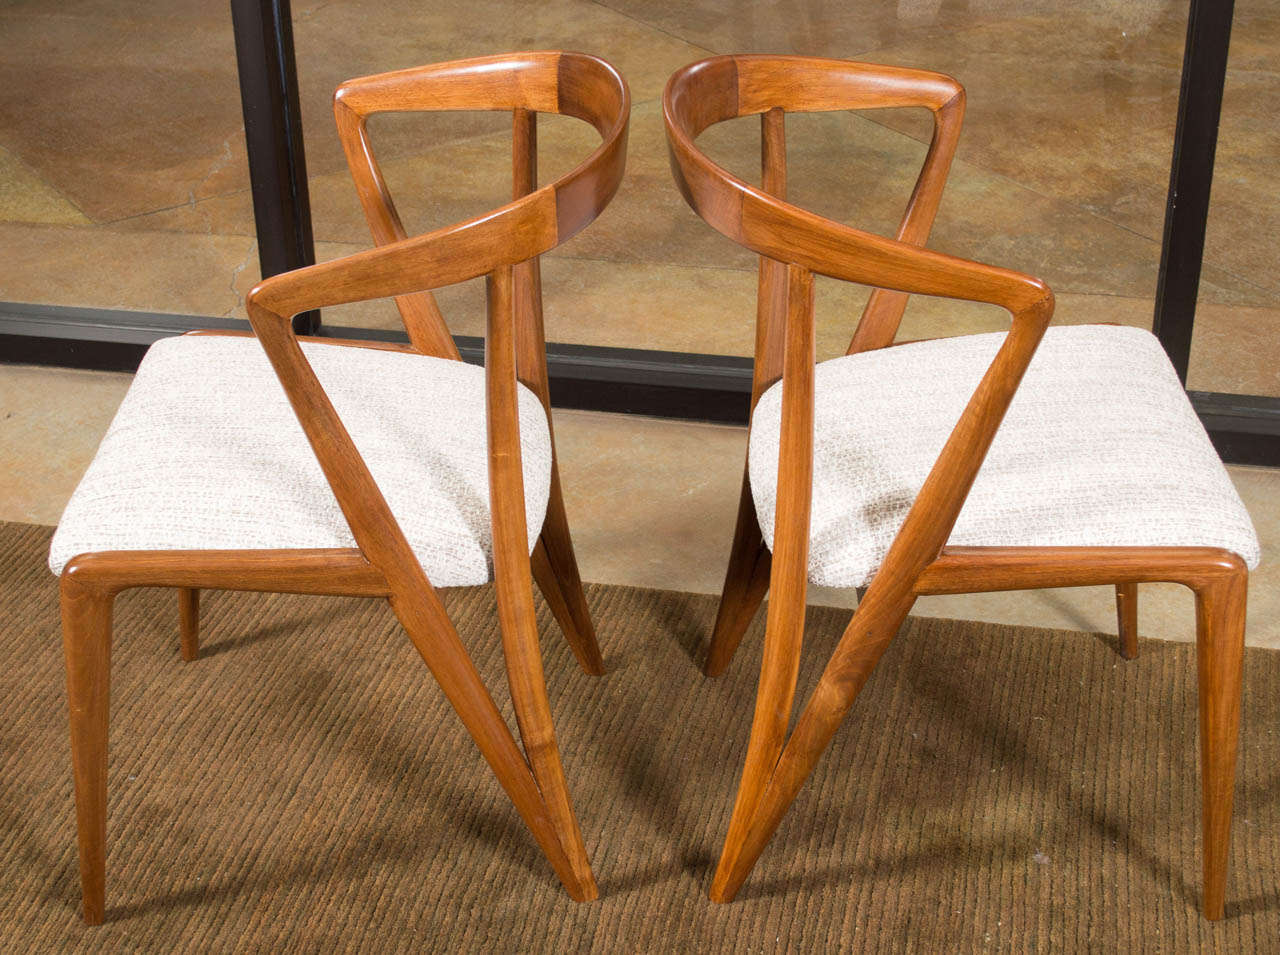 Mid-20th Century Bertha Schaefer - Pair of Side Chairs